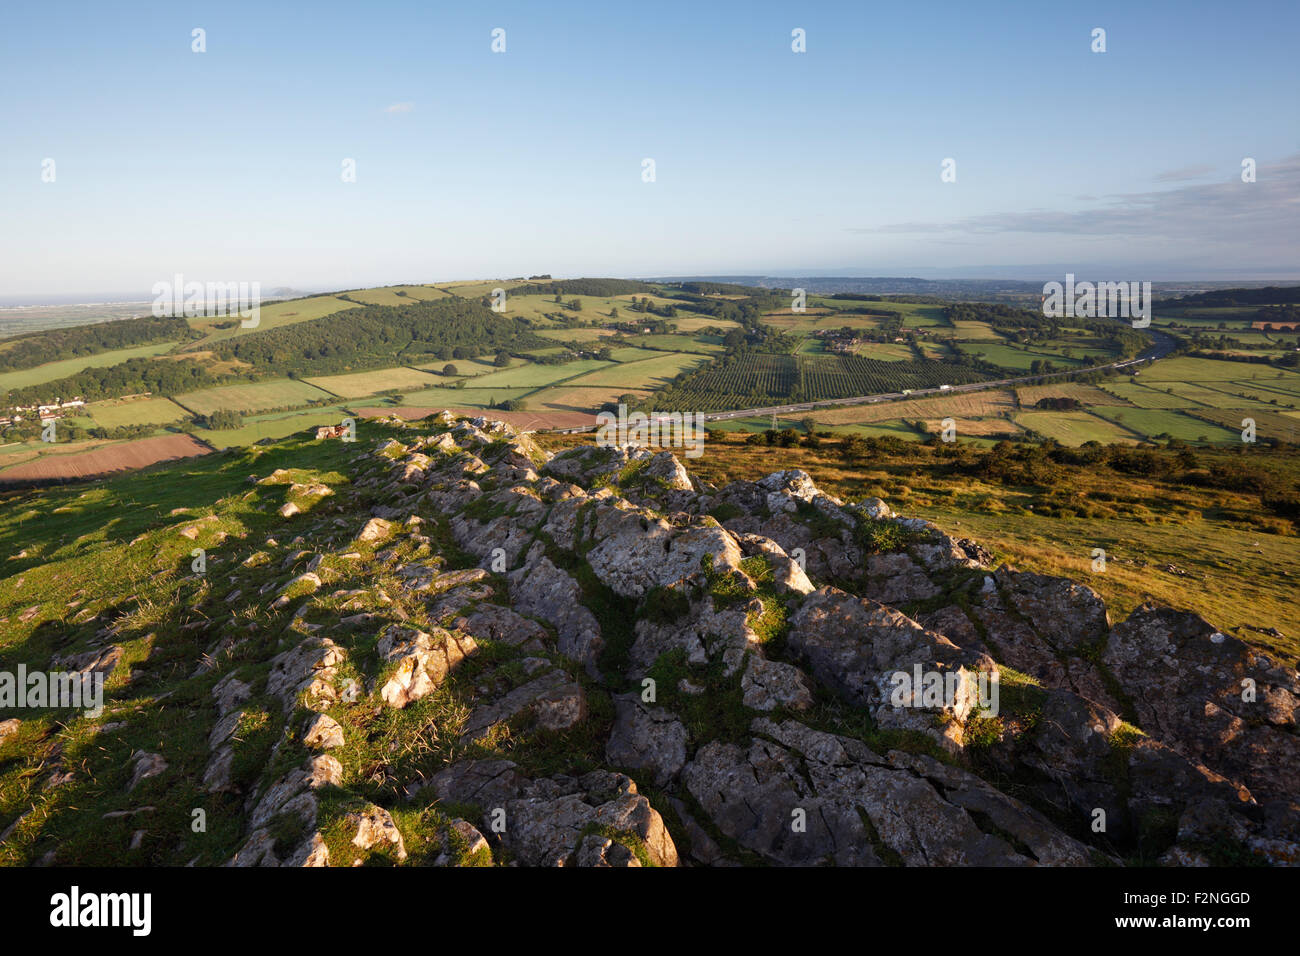 View from the summit of Crook Peak. The Mendip Hills. Somerset. UK. Stock Photo